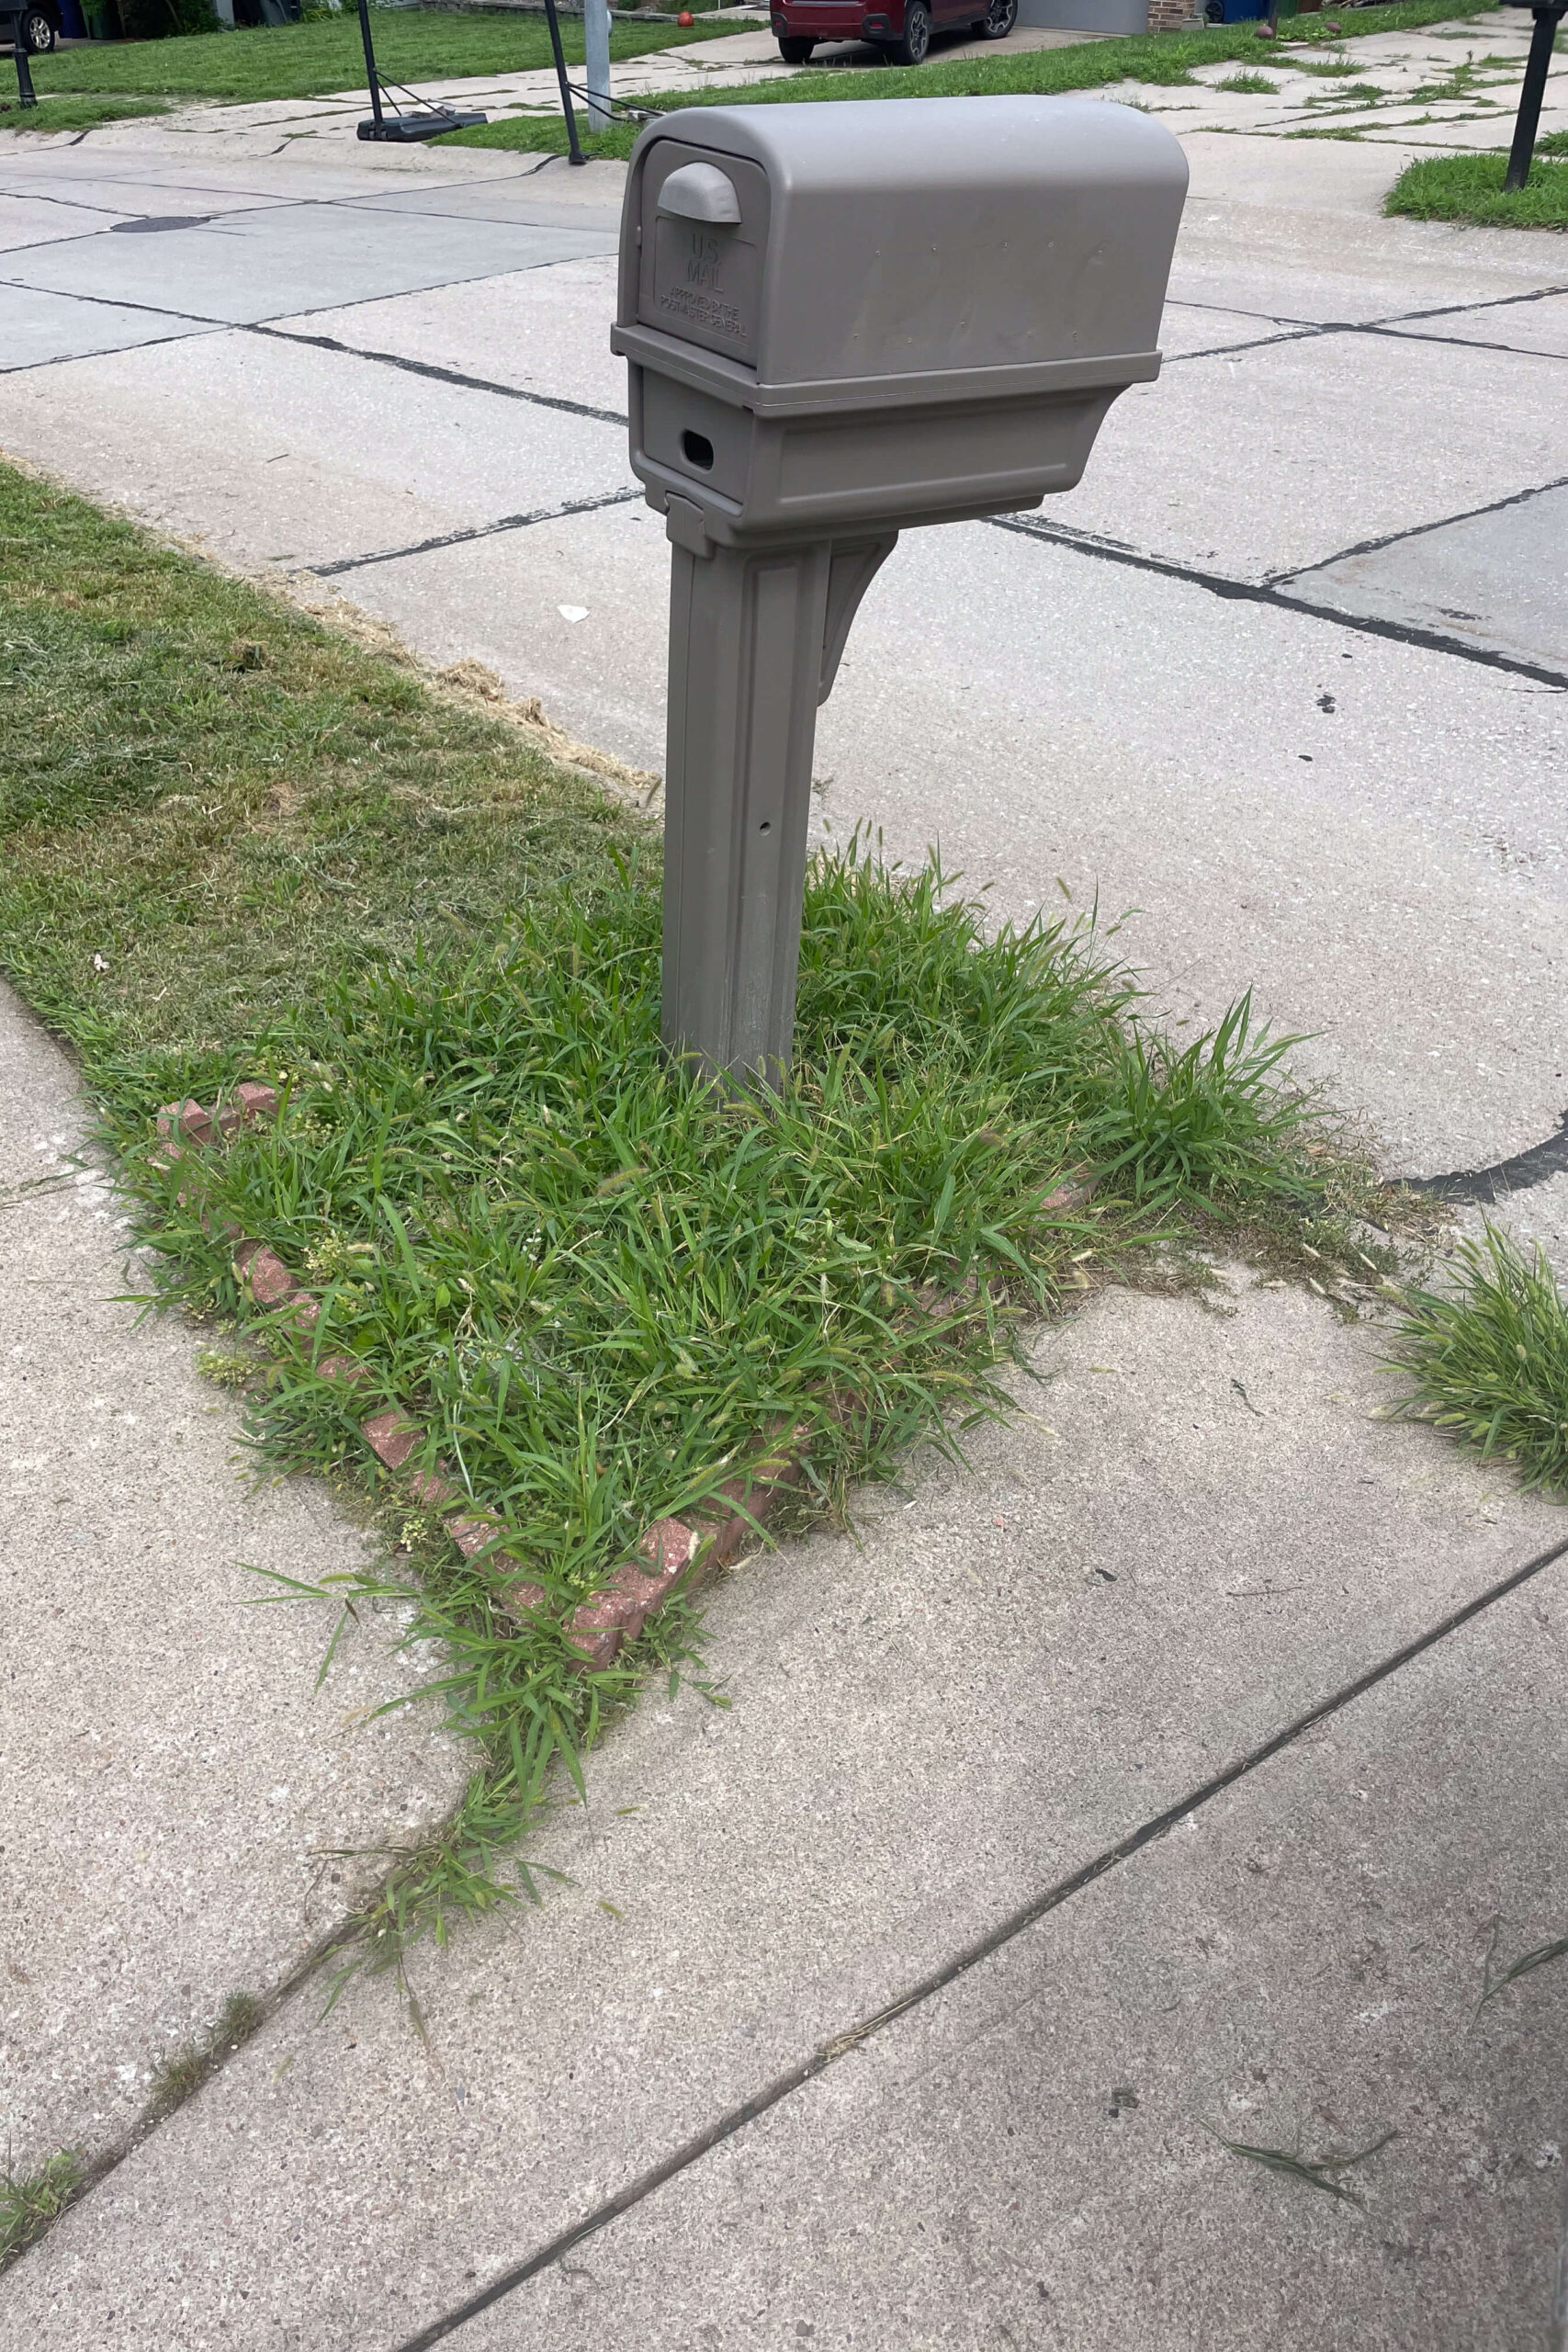 Before picture of mailbox with overgrown weeds.